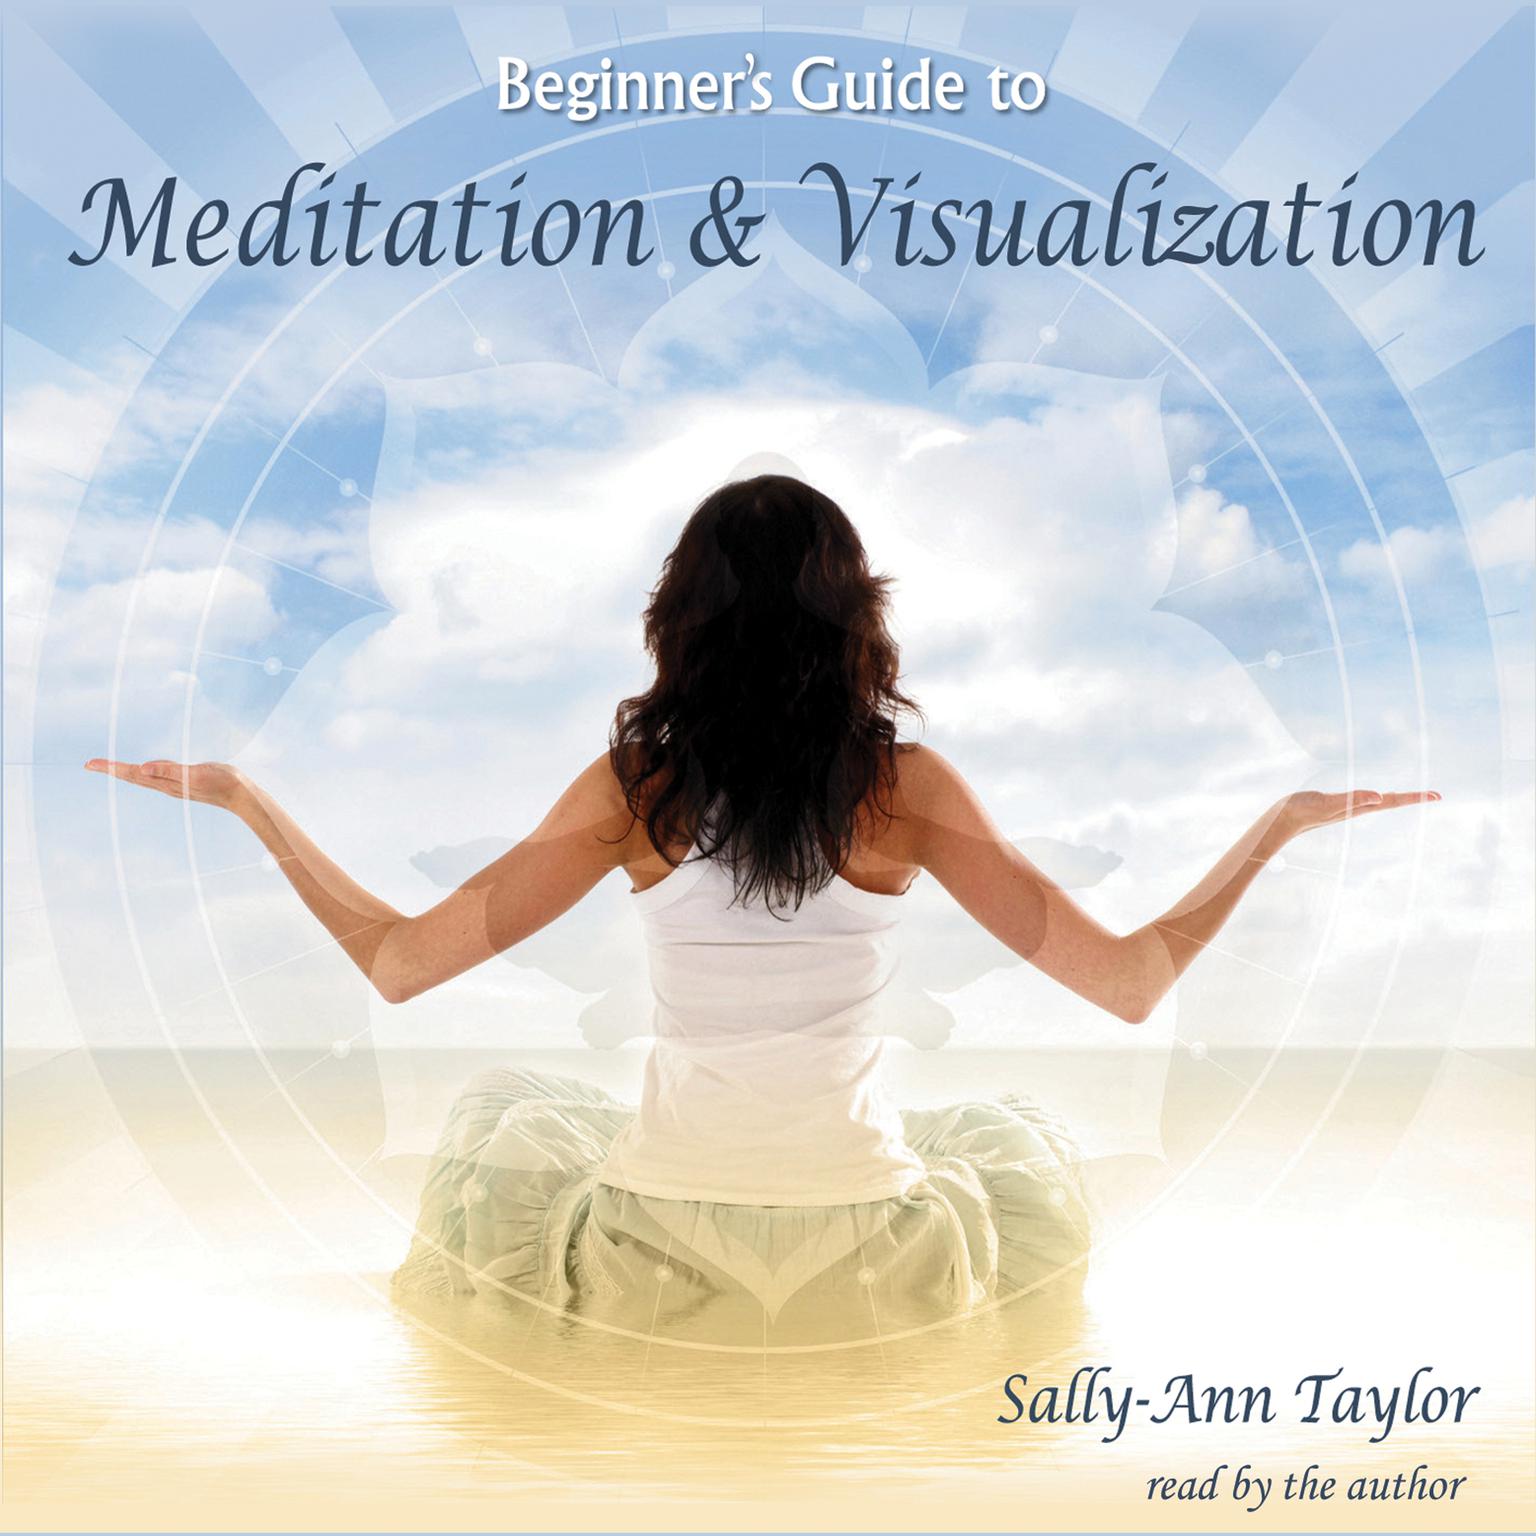 Beginner’s Guide to Meditation & Visualization Audiobook, by Sally-Ann Taylor